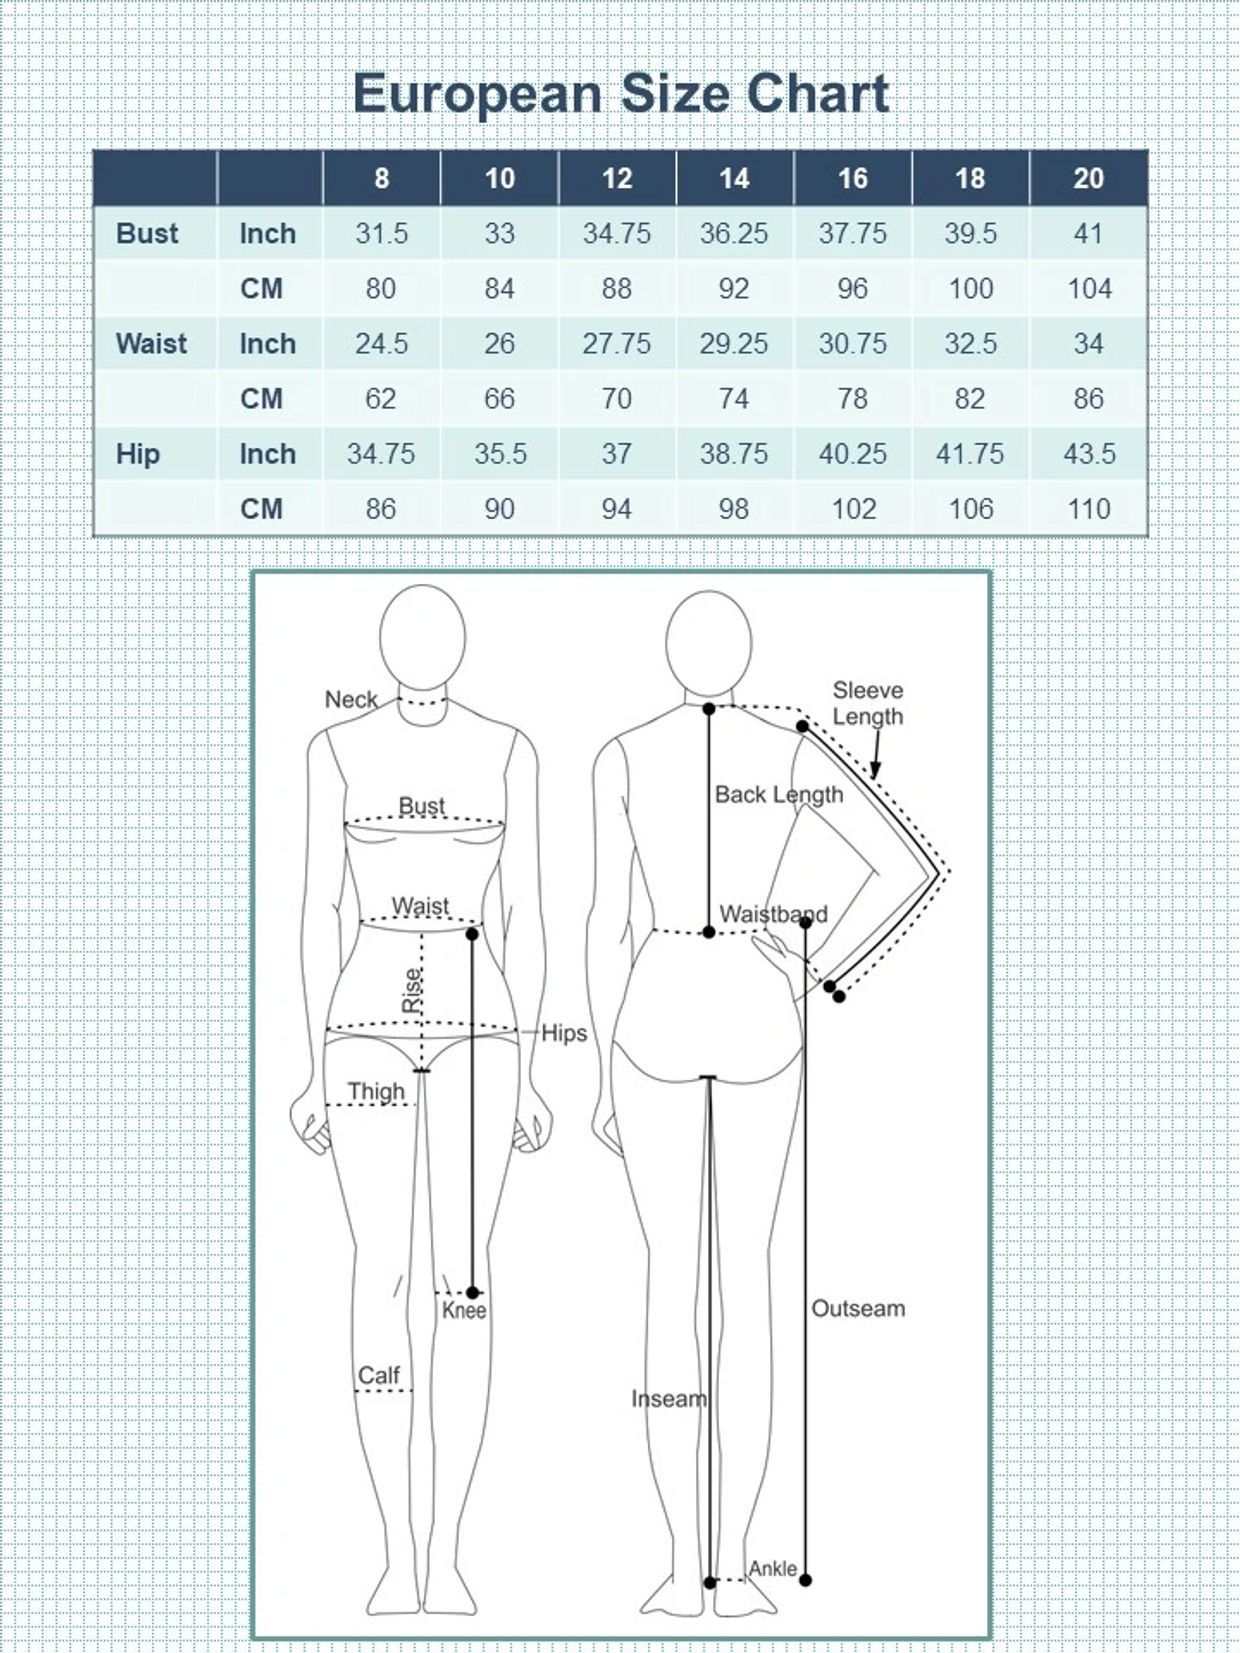 European Size Chart to give measurements for European Patterns and Garments